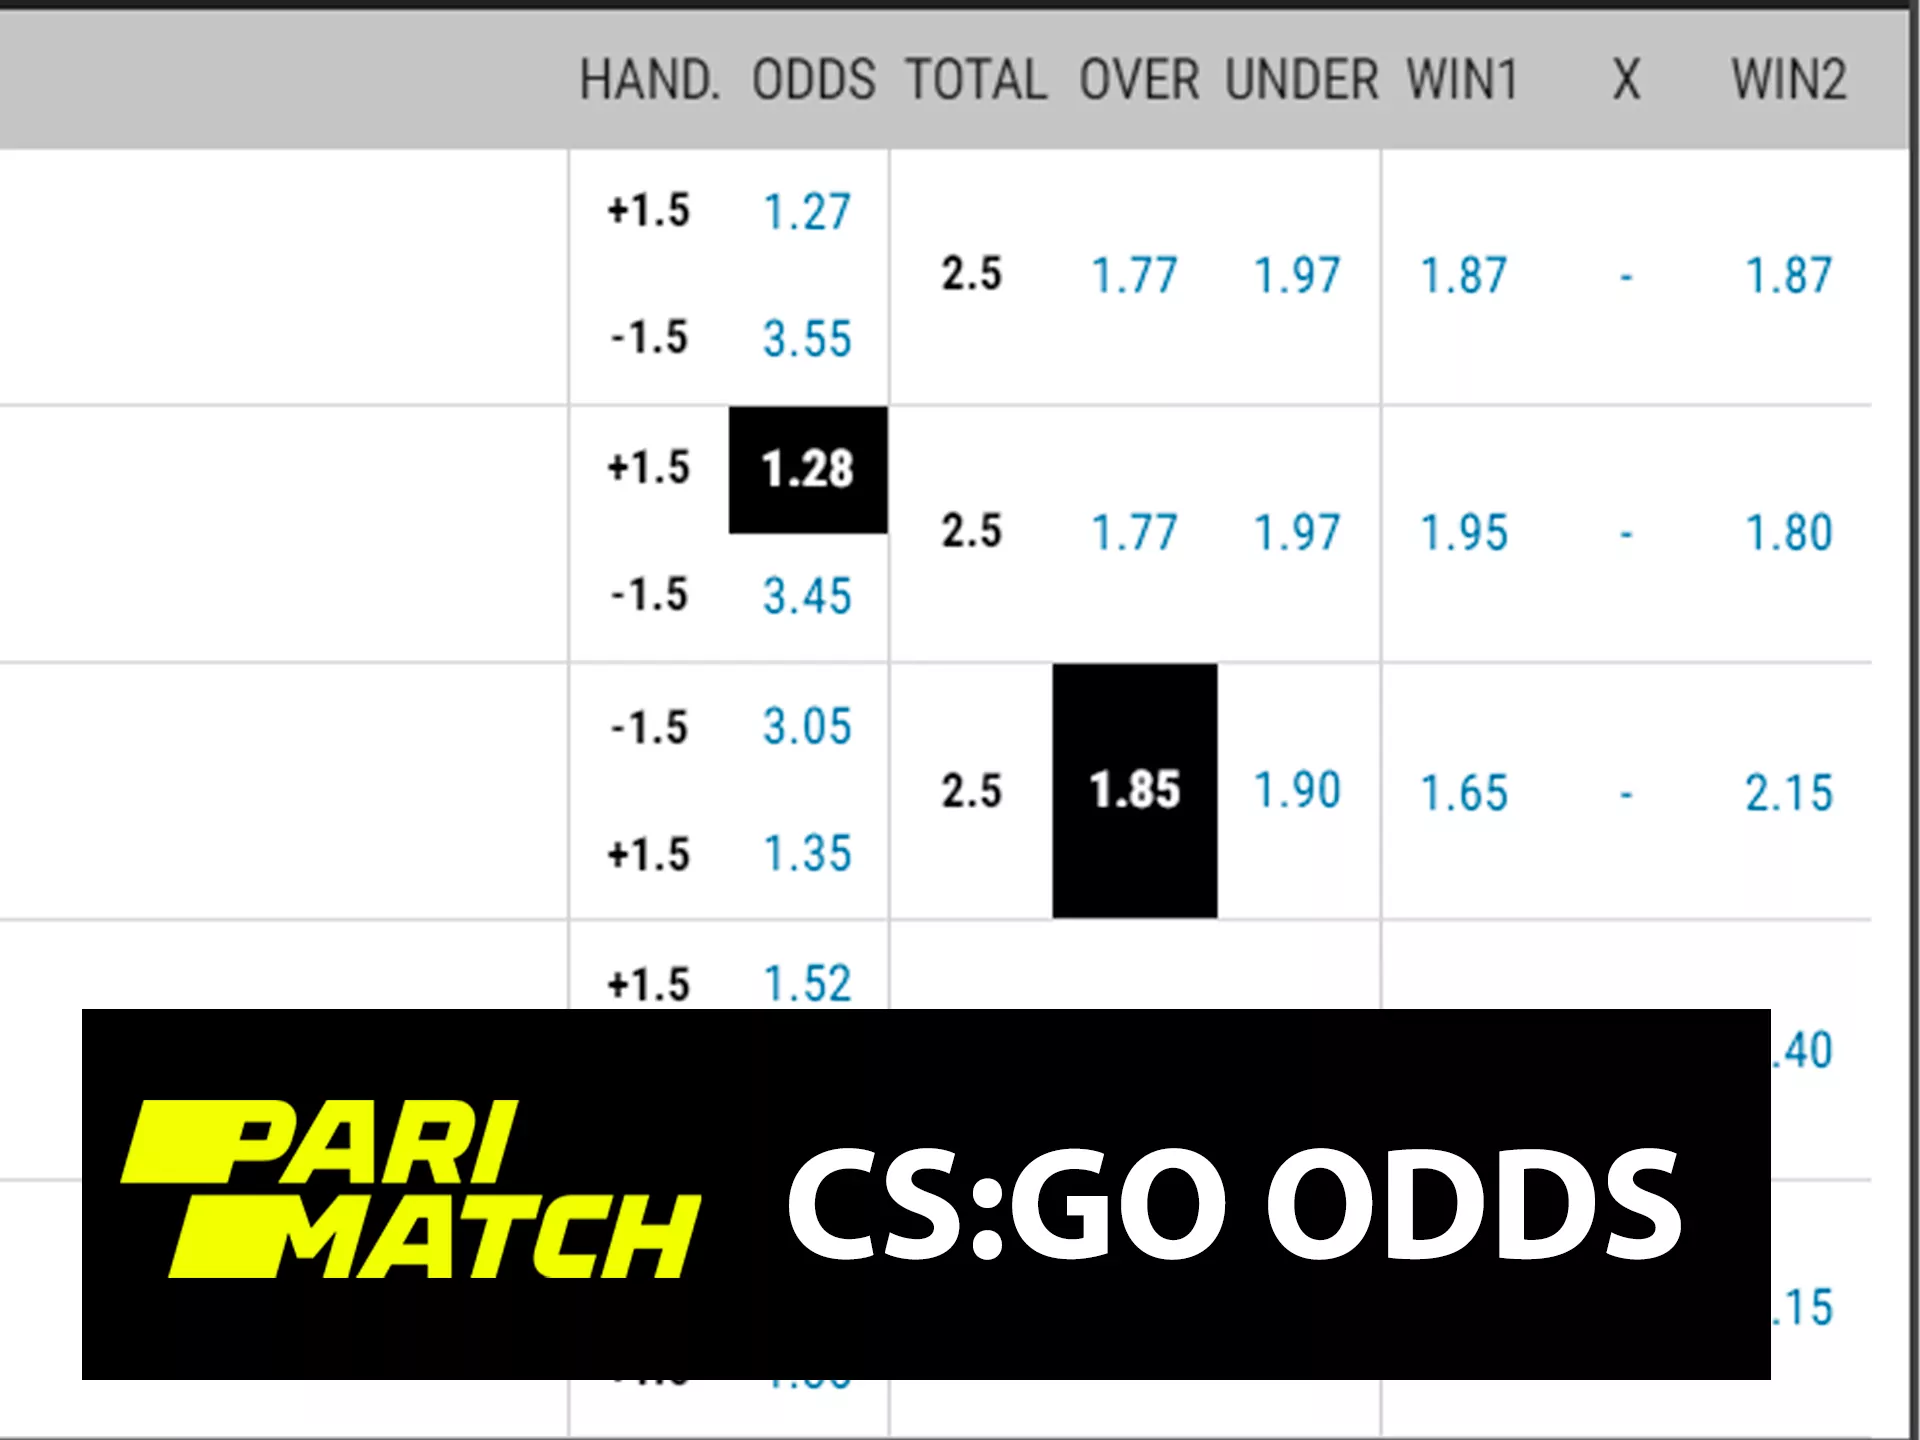 There are a lot of profitable odds on CS:Go at Parimtach sportsbook.